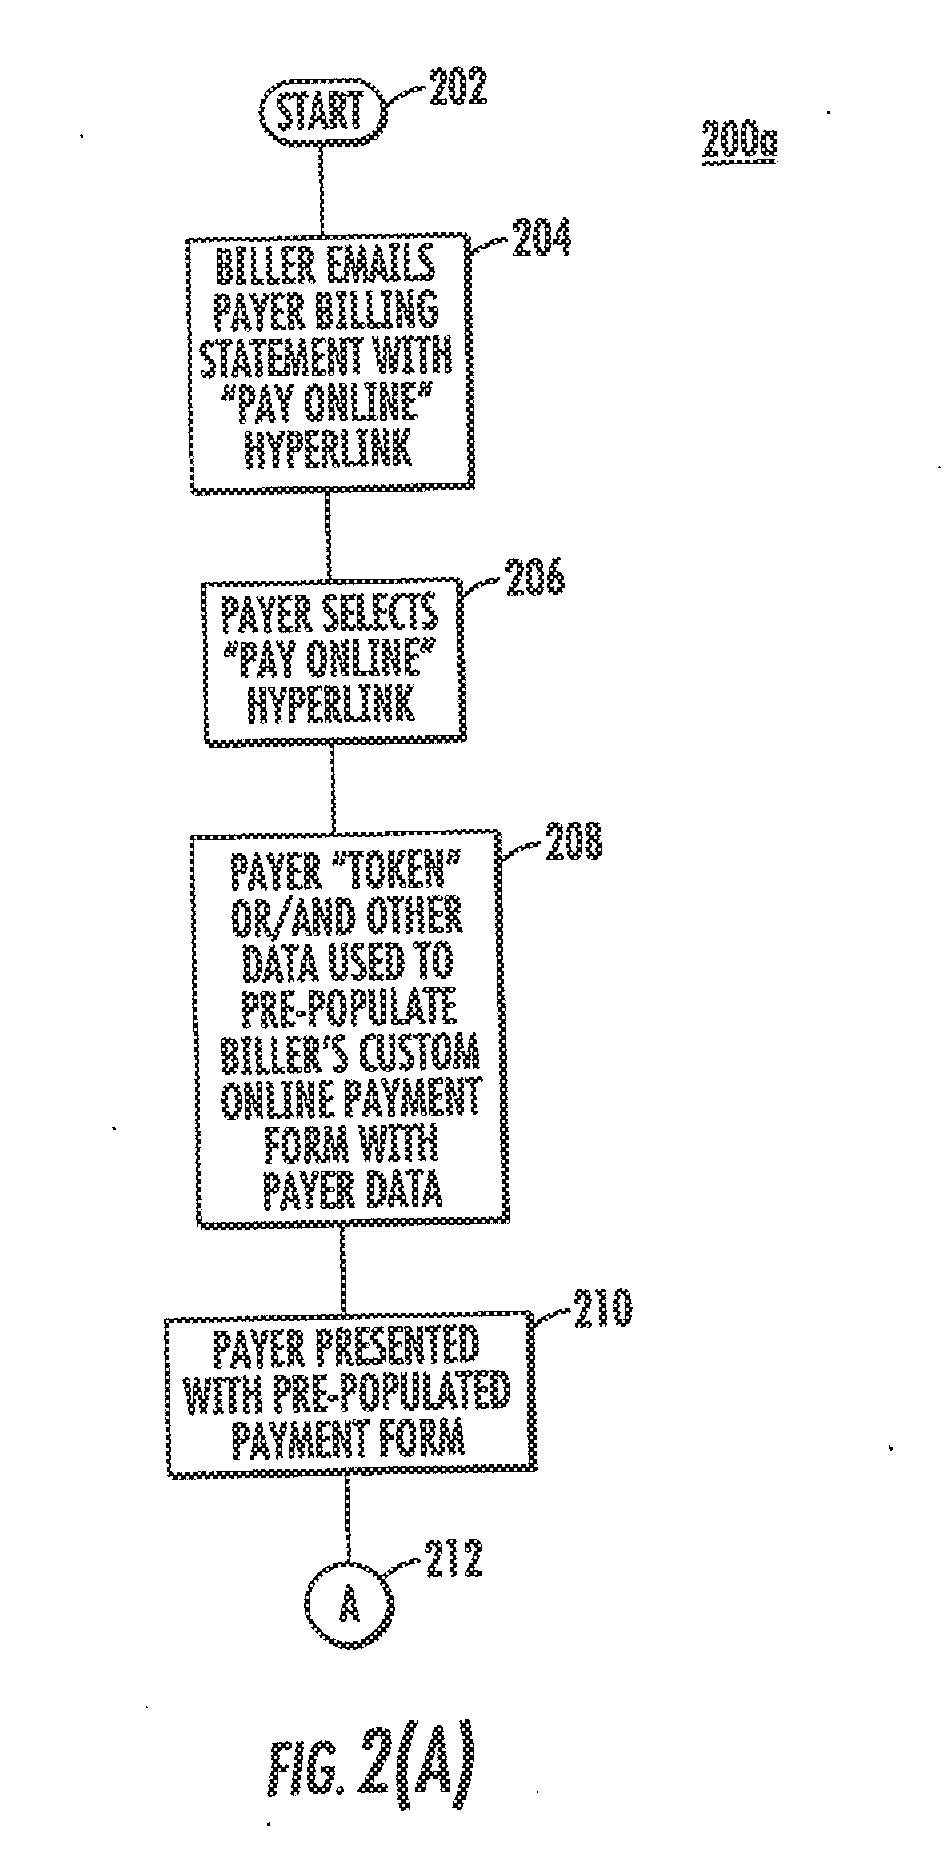 Method and system to process payment using URL shortening and/or qr codes